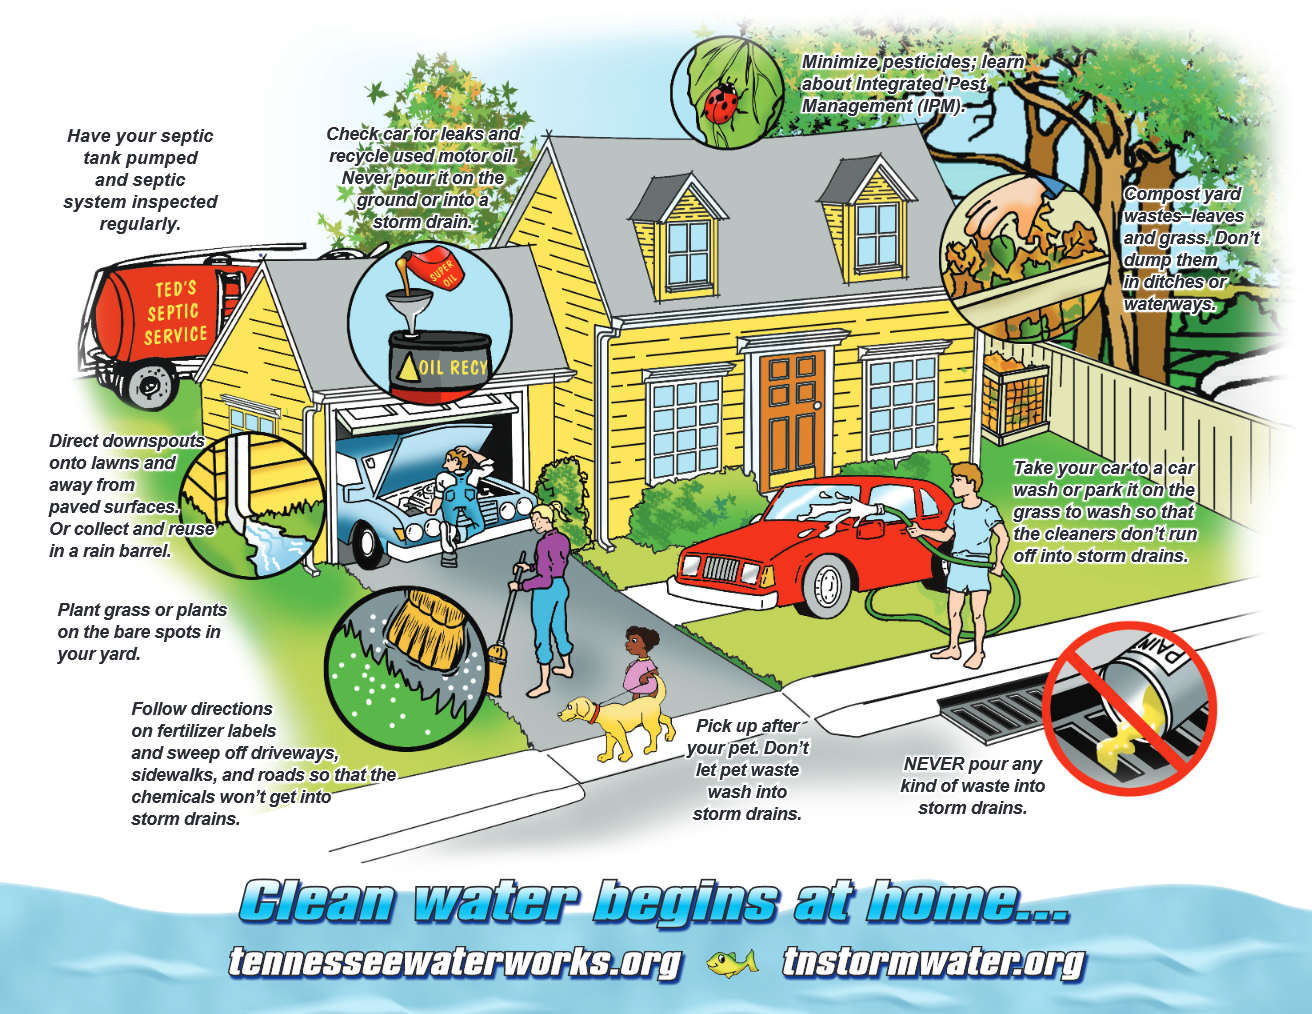 Cleaner Water Begins at Home